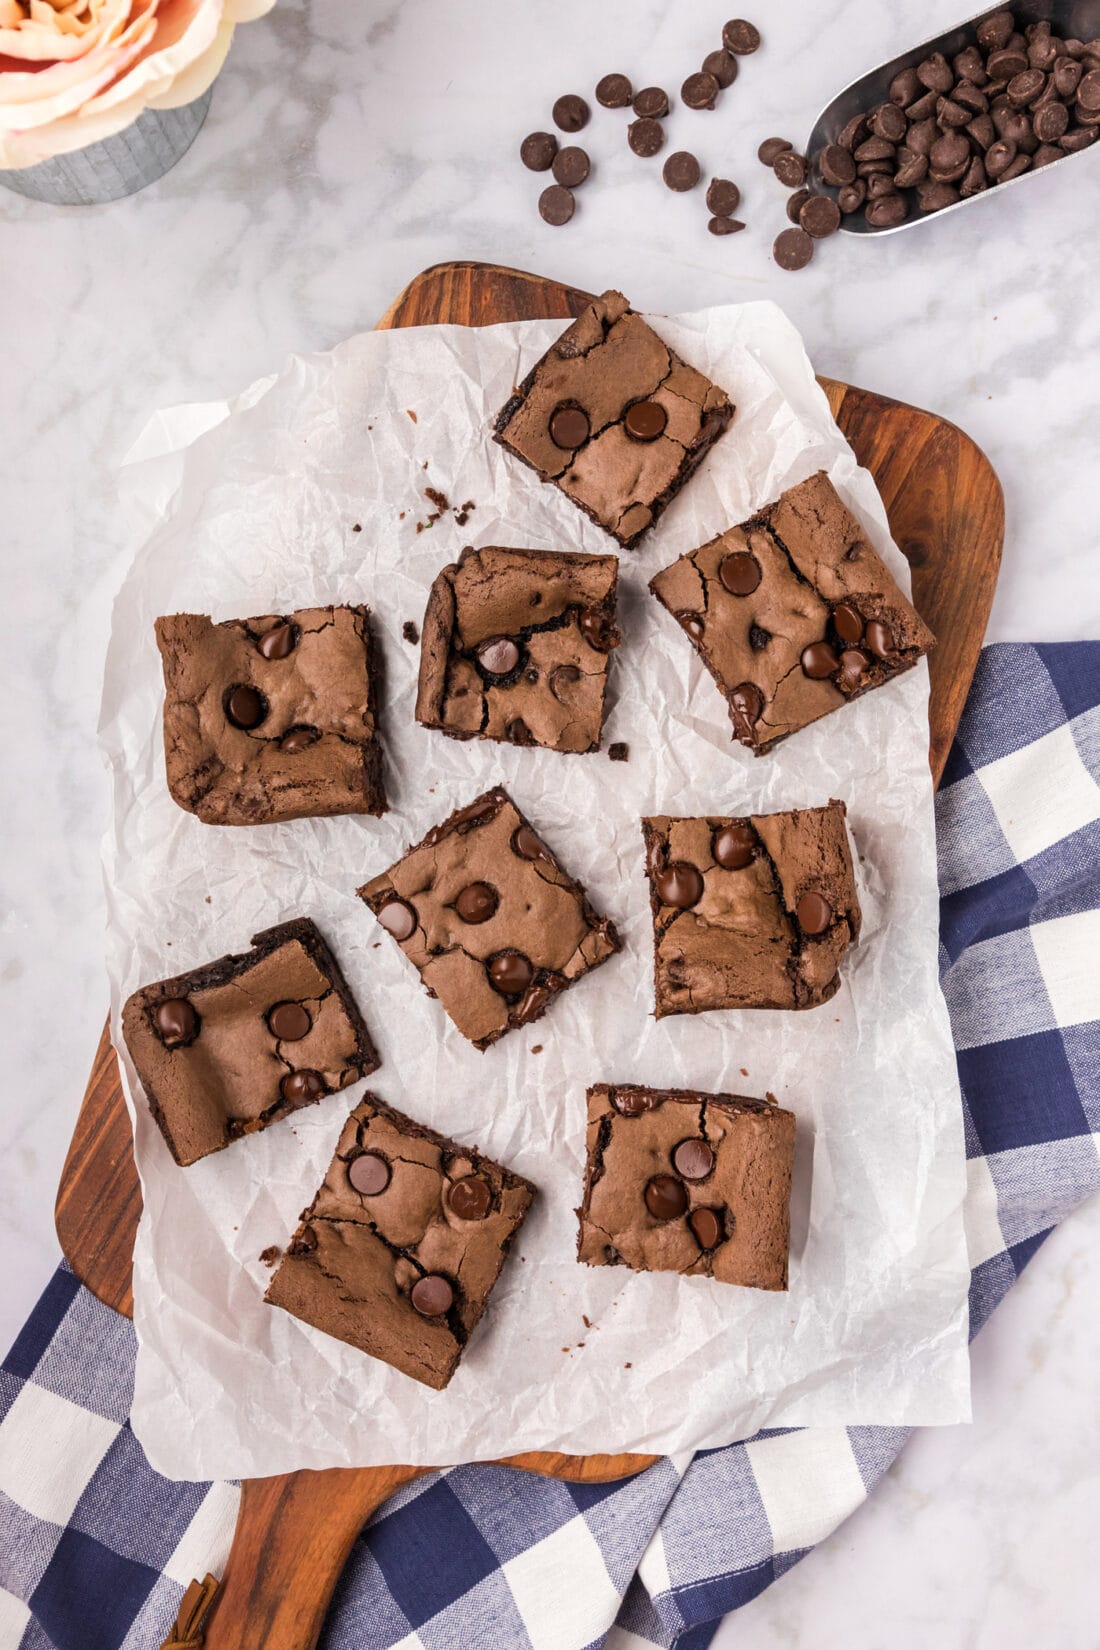 Cake Mix Brownies cut into squares on parchment paper